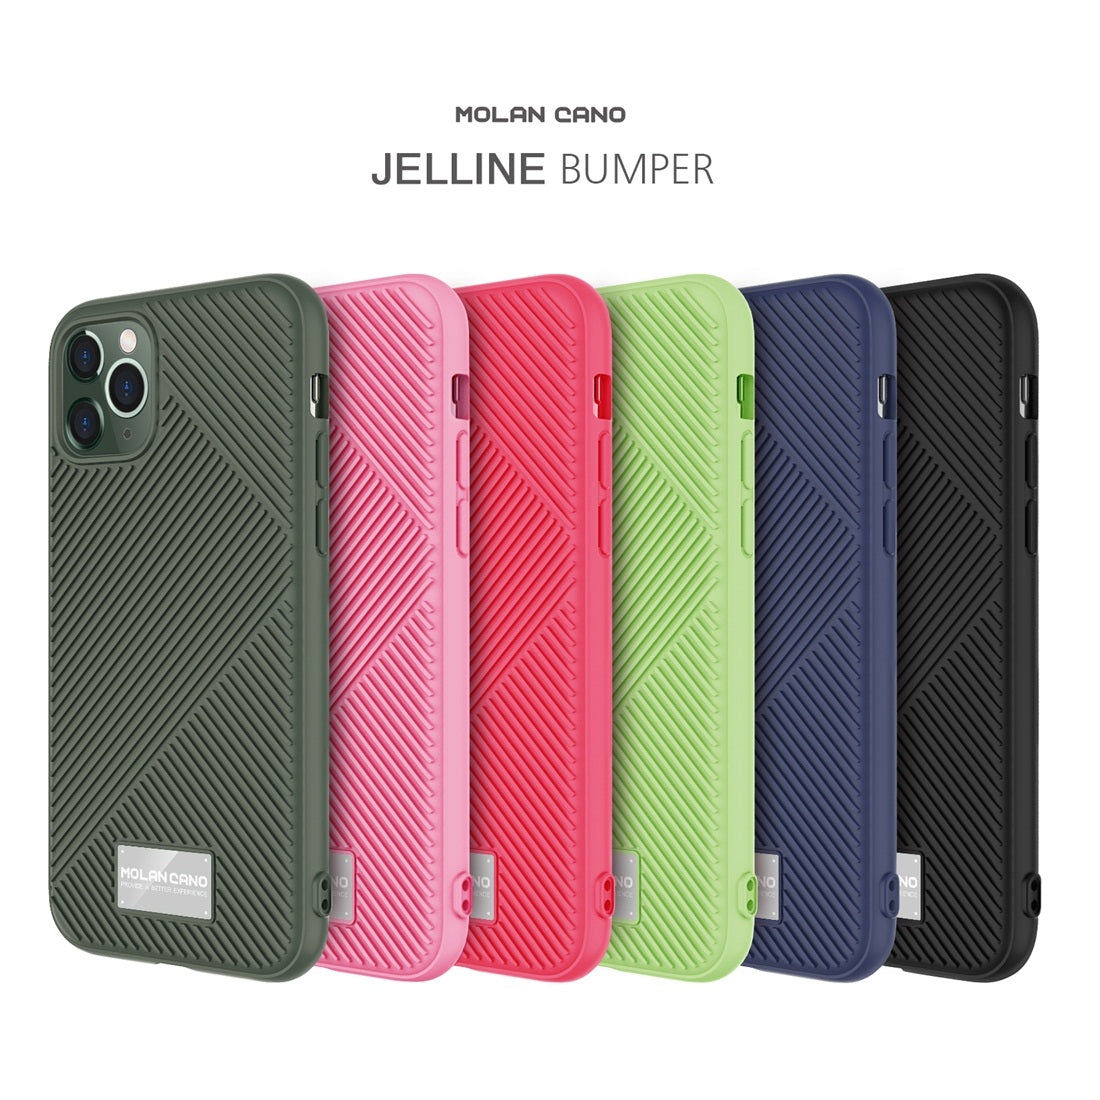 For iPhone 11 MOLANCANO JELLINE BUMPER Shockproof TPU Protective Case(Army Green)